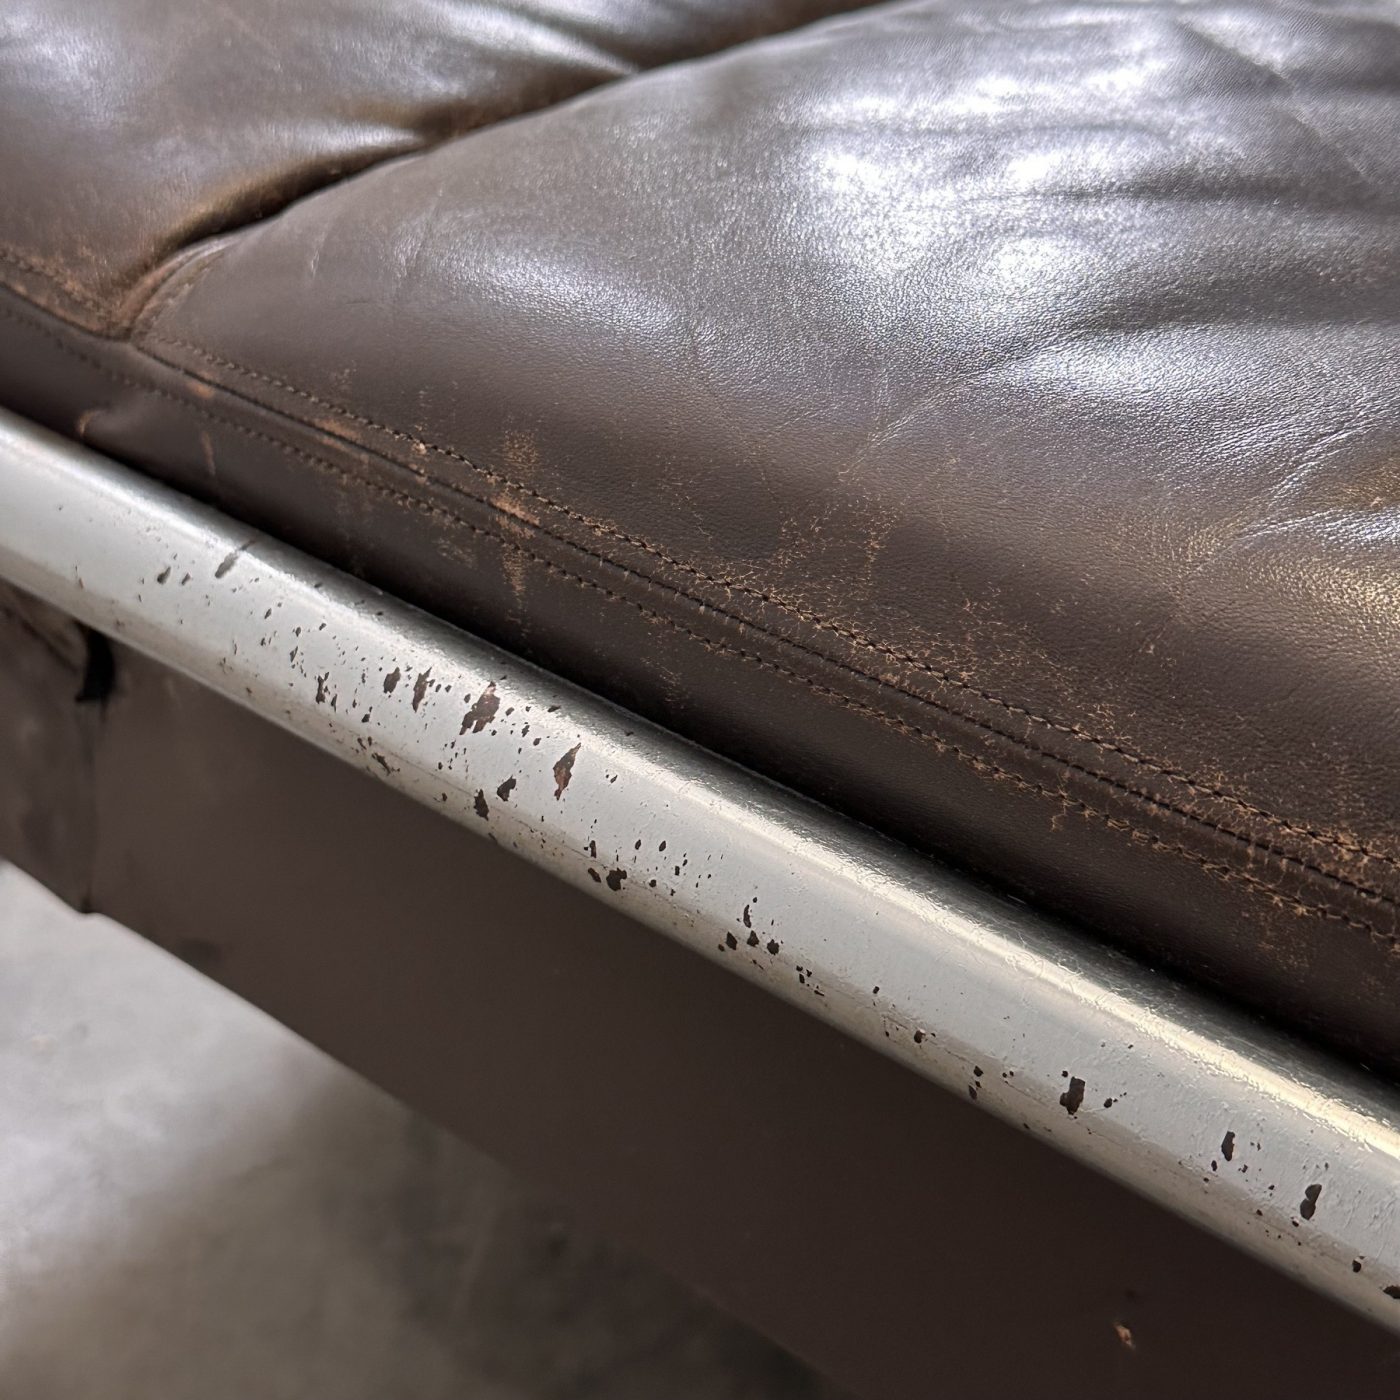 objet-vagabond-leather-couch0007